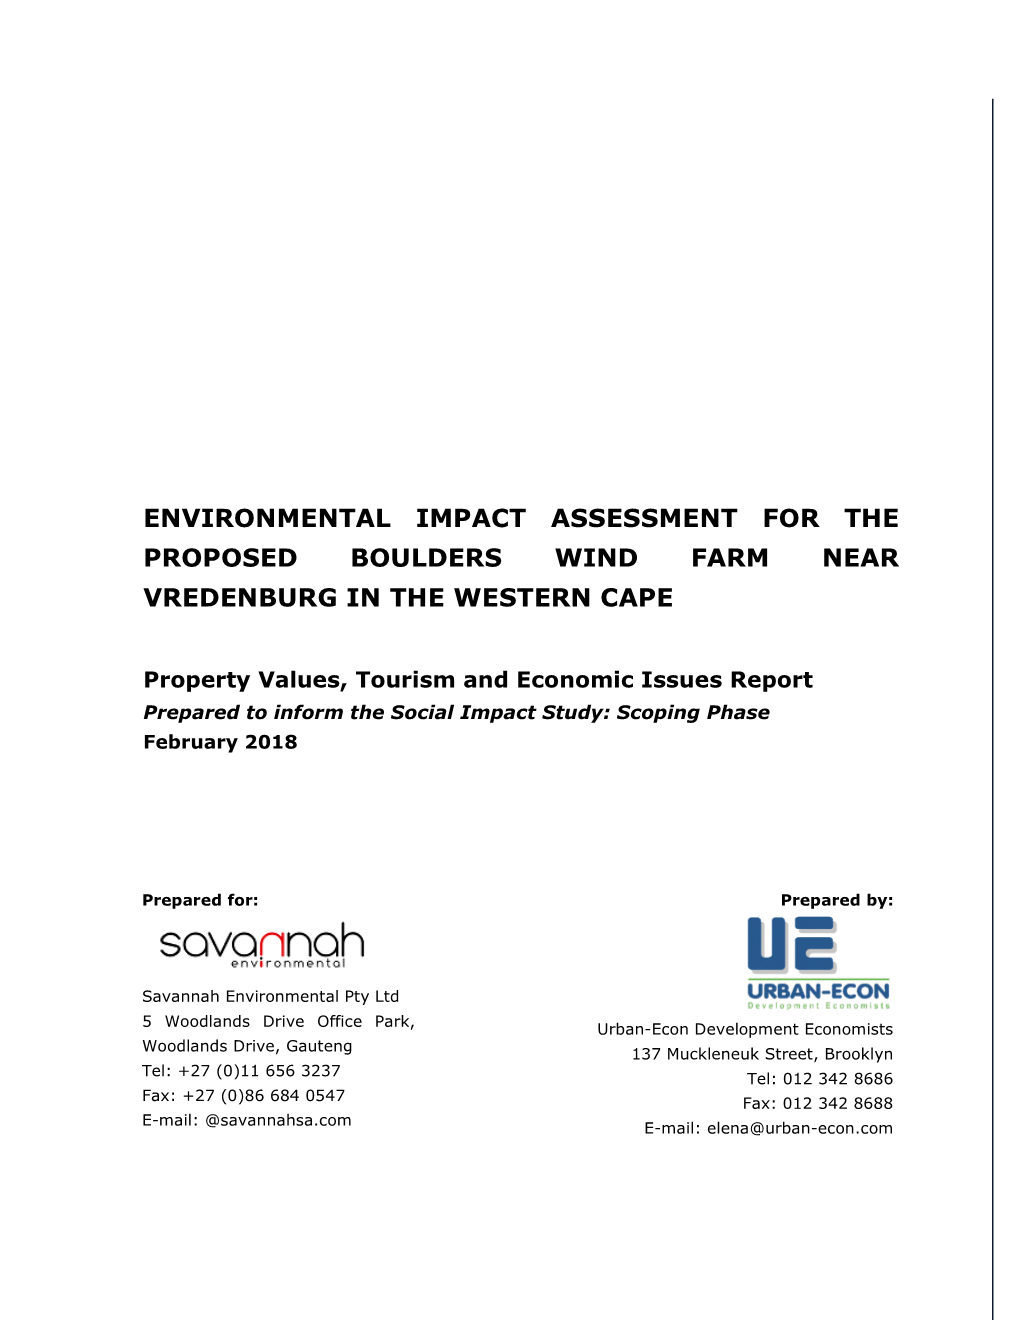 Environmental Impact Assessment for the Proposed Boulders Wind Farm Near Vredenburg in the Western Cape